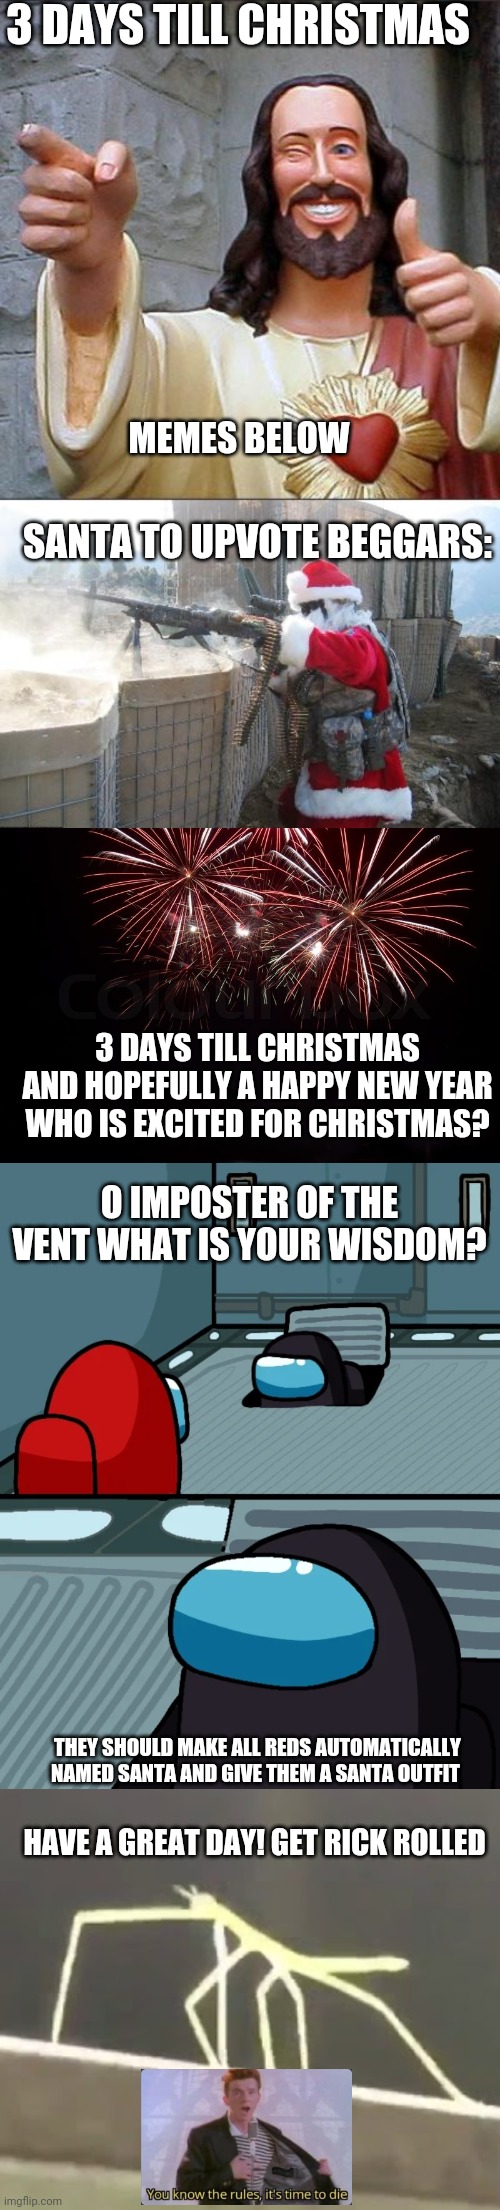 3 days till Christmas! | 3 DAYS TILL CHRISTMAS; MEMES BELOW; SANTA TO UPVOTE BEGGARS:; 3 DAYS TILL CHRISTMAS AND HOPEFULLY A HAPPY NEW YEAR WHO IS EXCITED FOR CHRISTMAS? O IMPOSTER OF THE VENT WHAT IS YOUR WISDOM? THEY SHOULD MAKE ALL REDS AUTOMATICALLY NAMED SANTA AND GIVE THEM A SANTA OUTFIT; HAVE A GREAT DAY! GET RICK ROLLED | image tagged in memes,buddy christ,hohoho,happy new year,impostor of the vent,get stickbugged lol | made w/ Imgflip meme maker